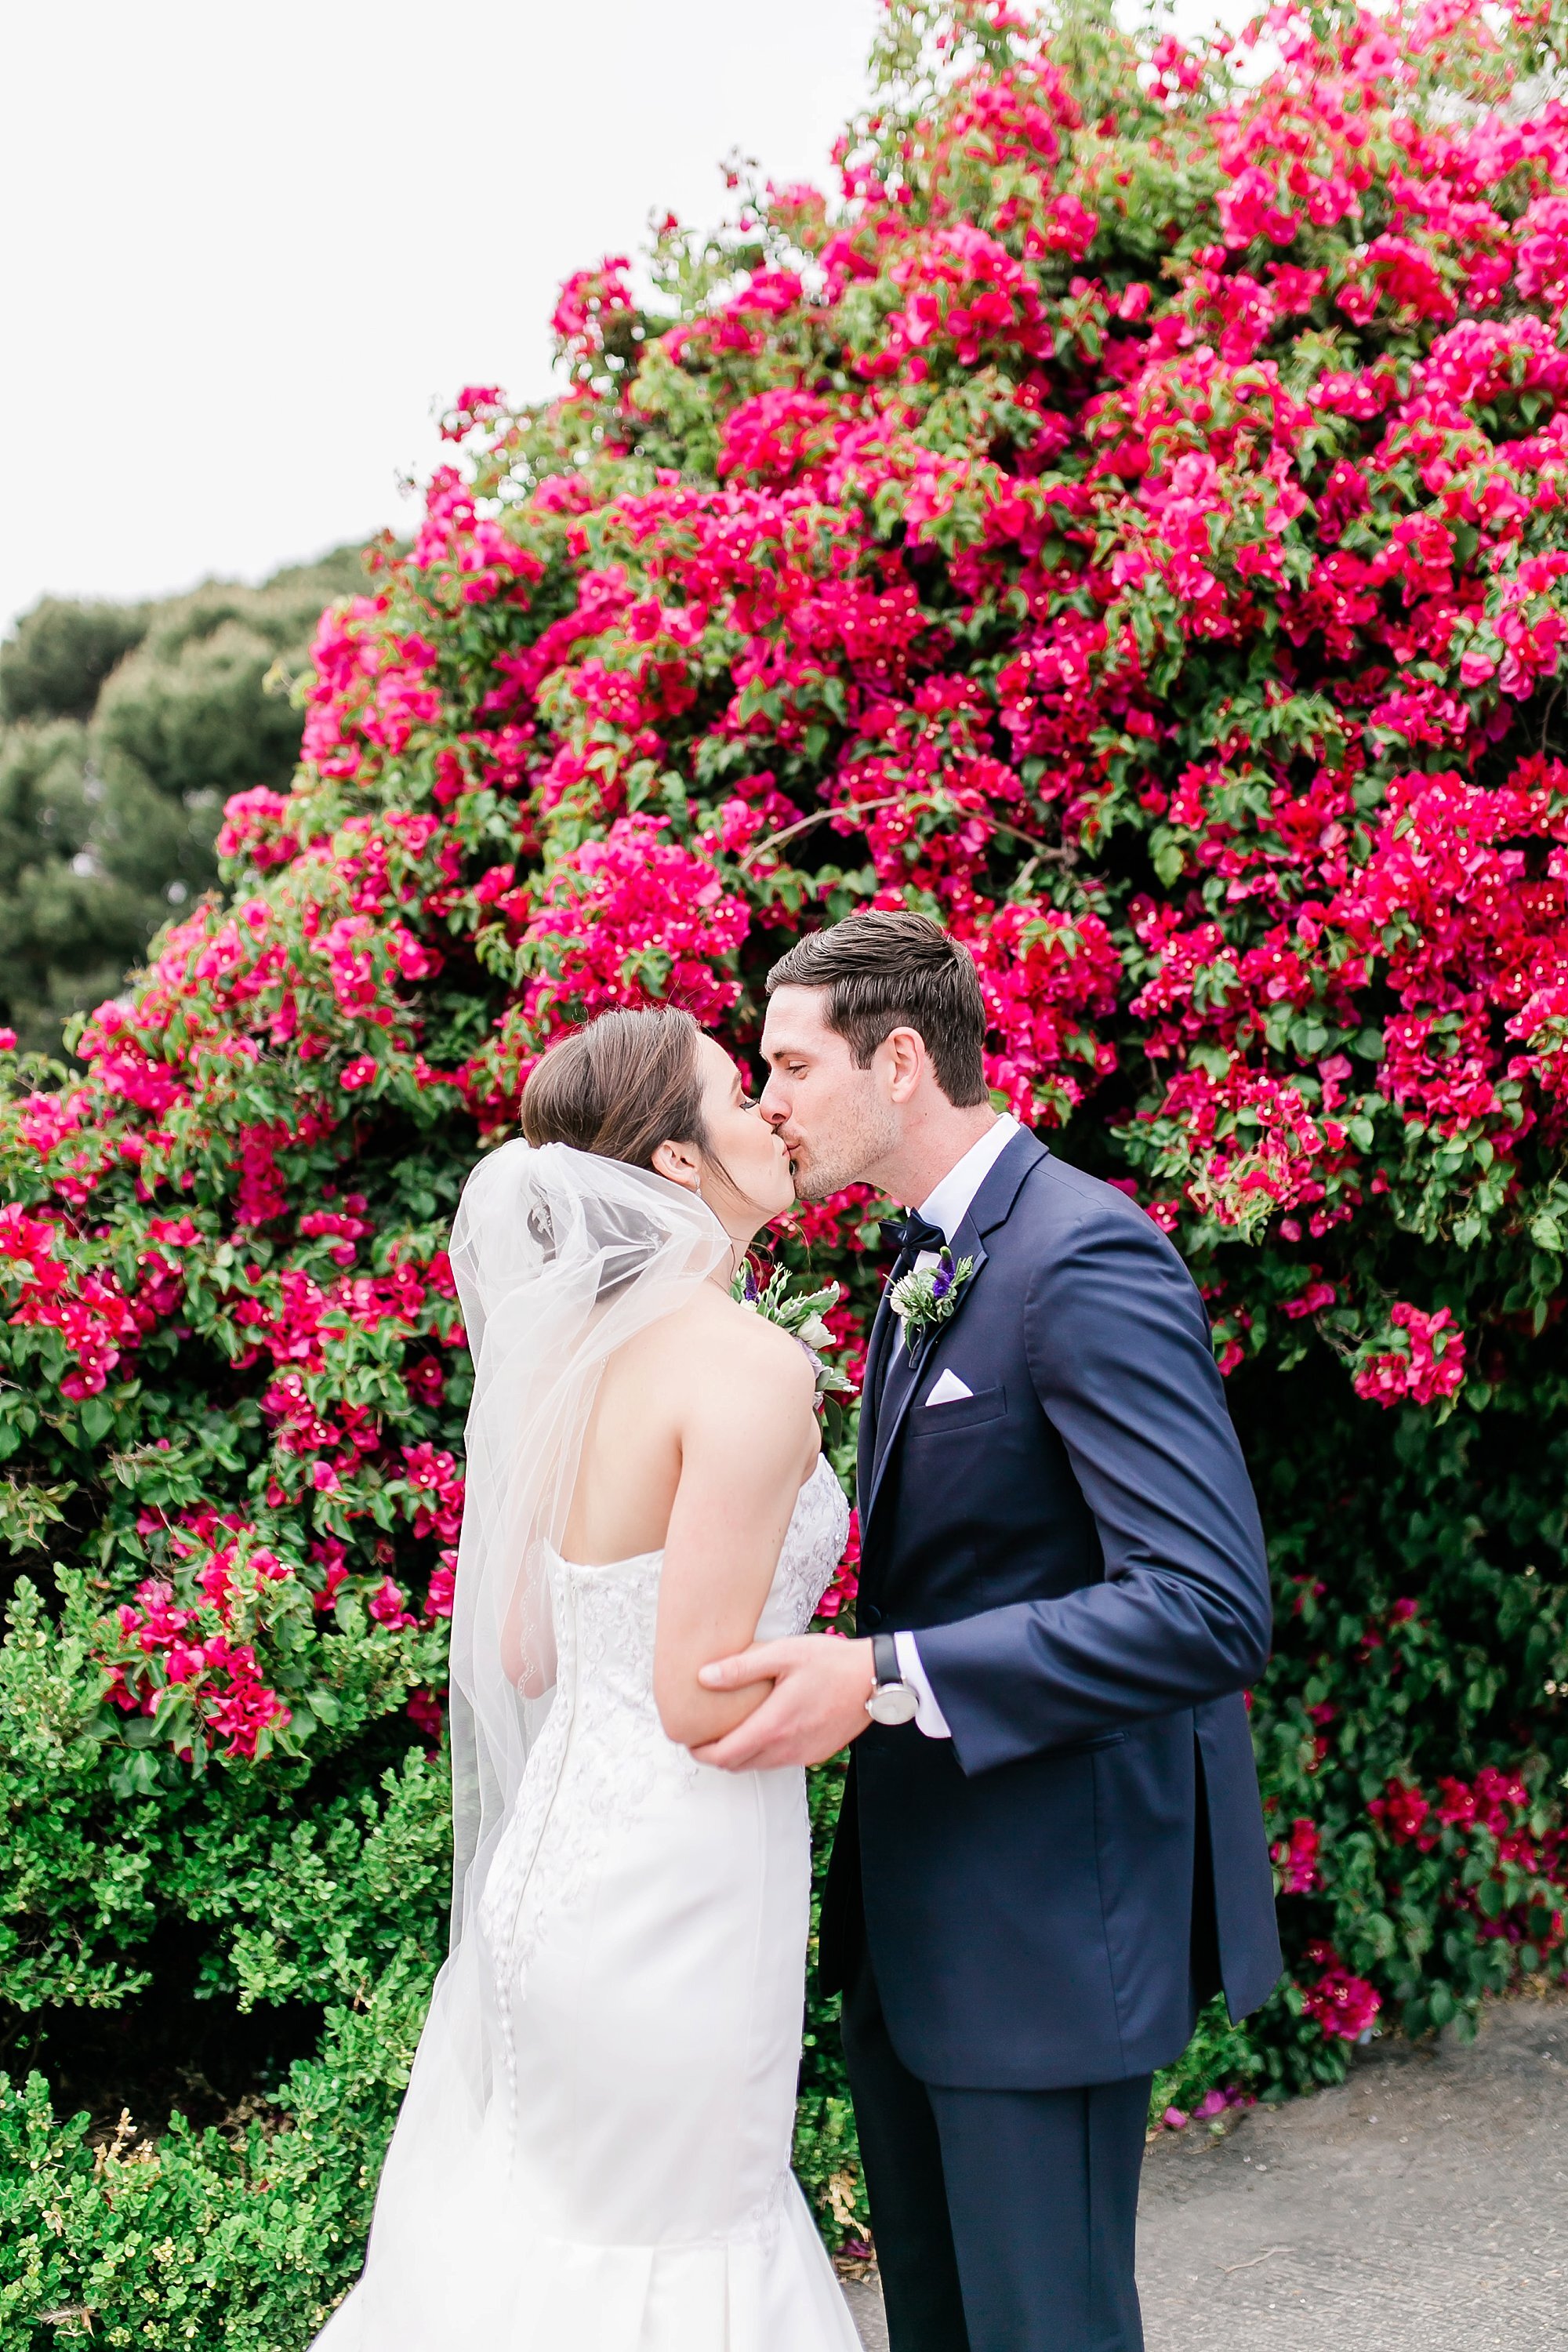  bride and groom in front of the pink flowers 